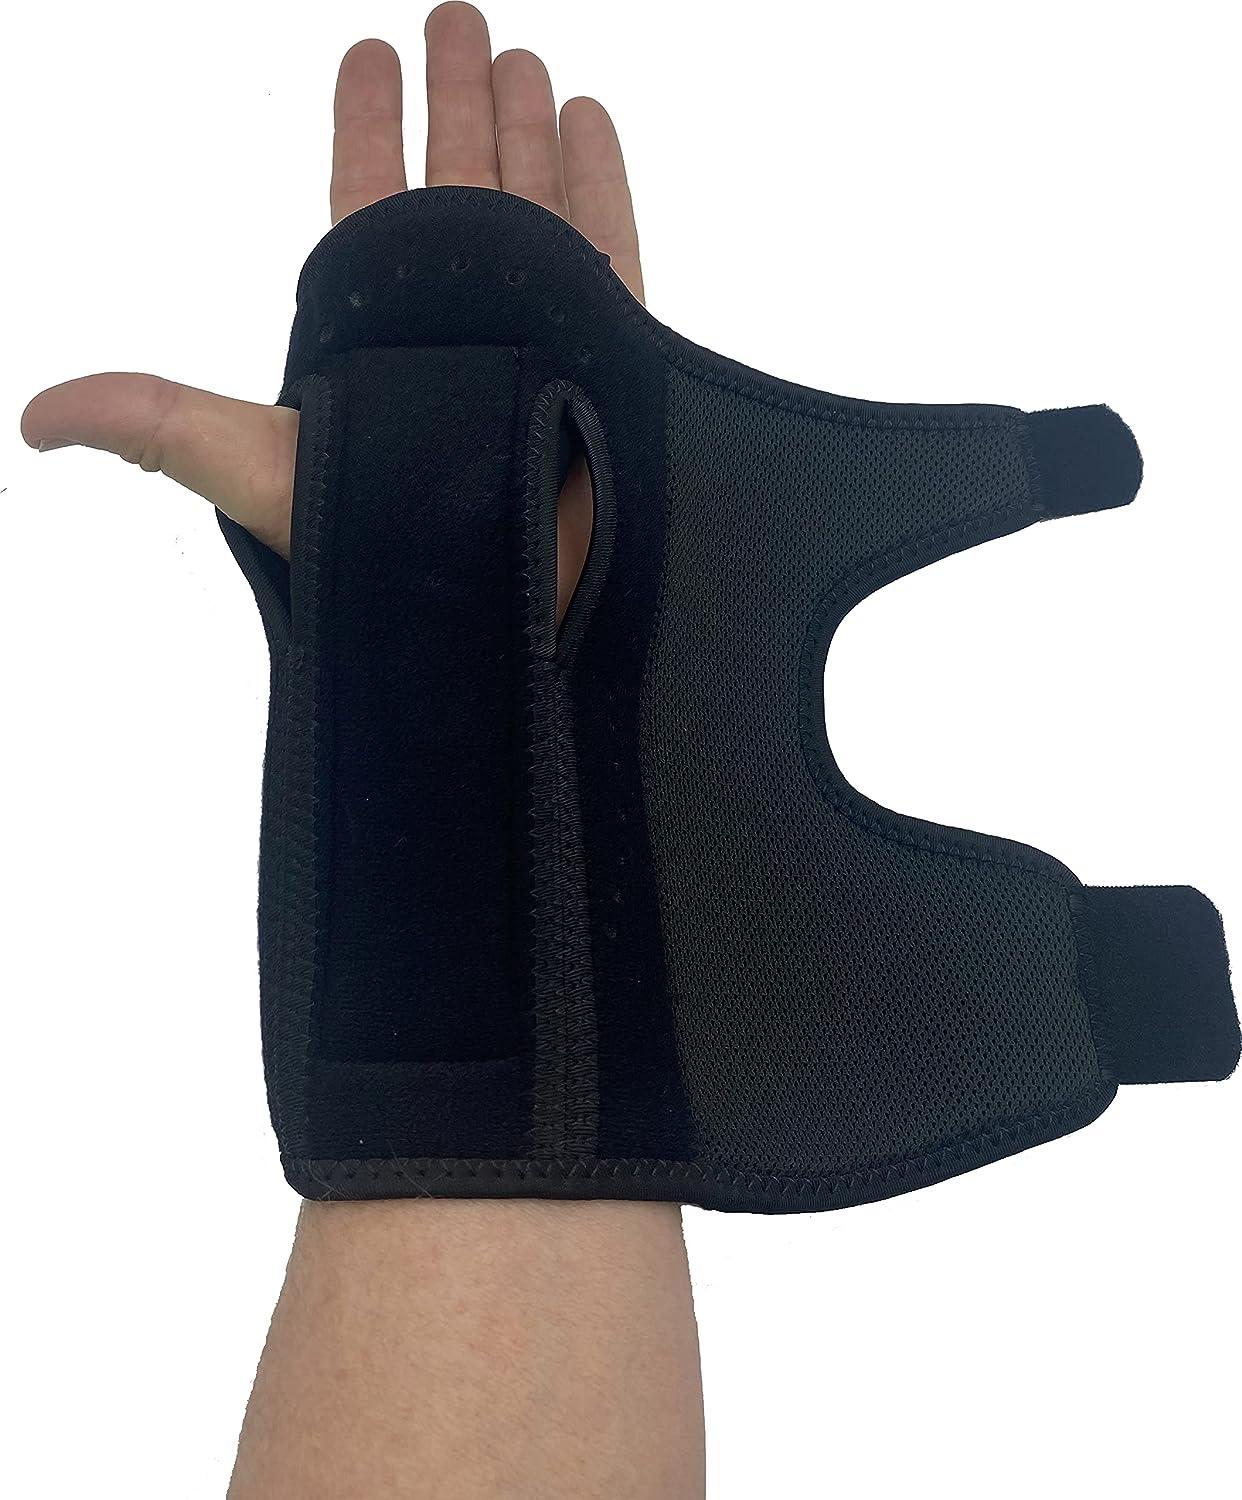 Therapist s Choice Night Wrist Sleep Support Brace Cushioned to Help  Relieve Carpal Tunnel Symptoms and Treat Wrist Pain Fits Right or Left Hand  Adjustable-Fits Most Sizes